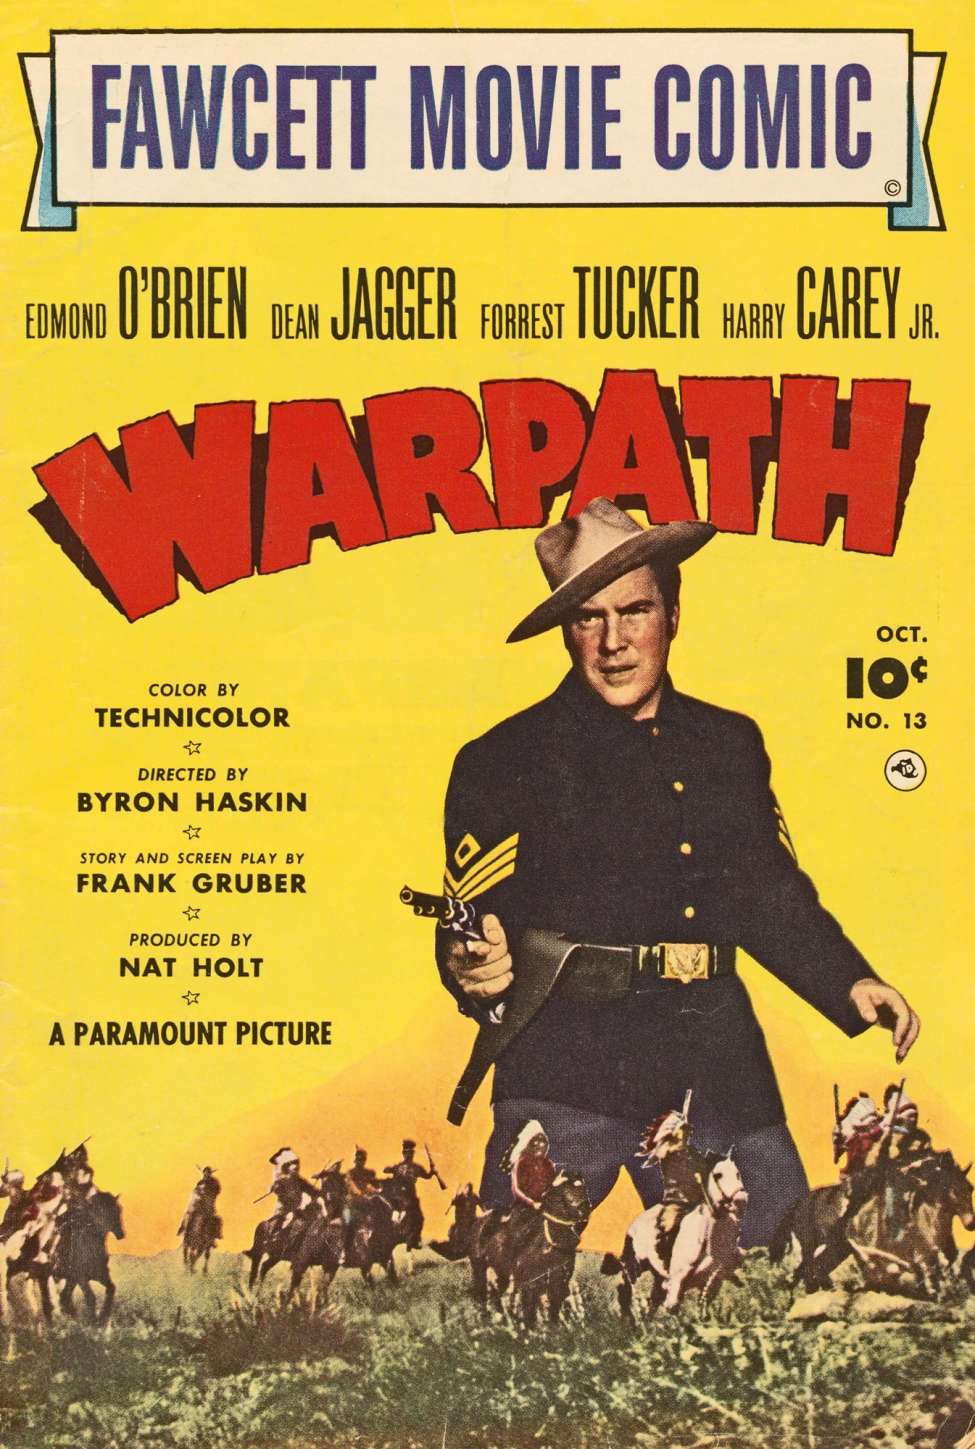 Comic Book Cover For Fawcett Movie Comic 13 - Warpath